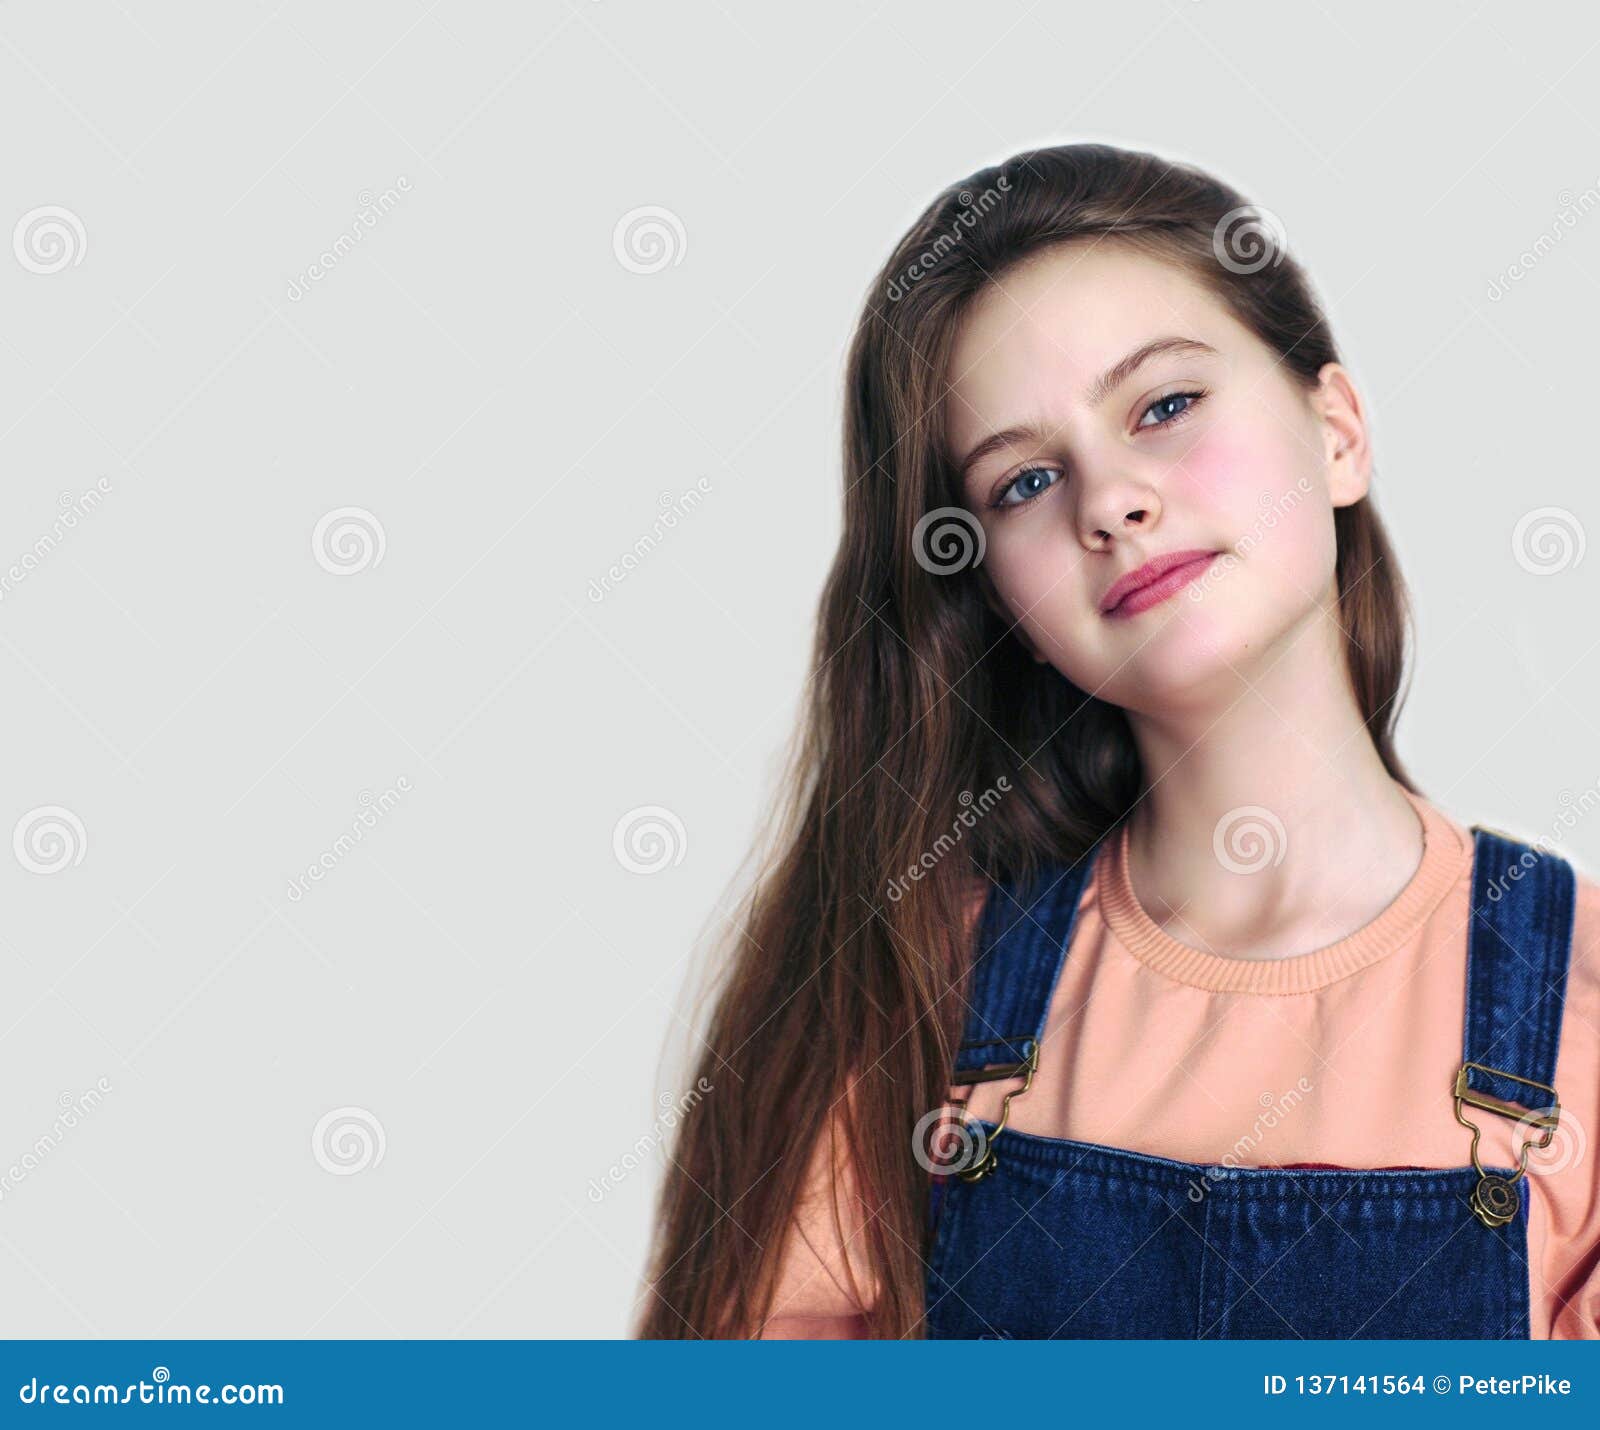 Blue Eyed Shy Girl With Flowing Hair Studio Model Shot Stock Photo